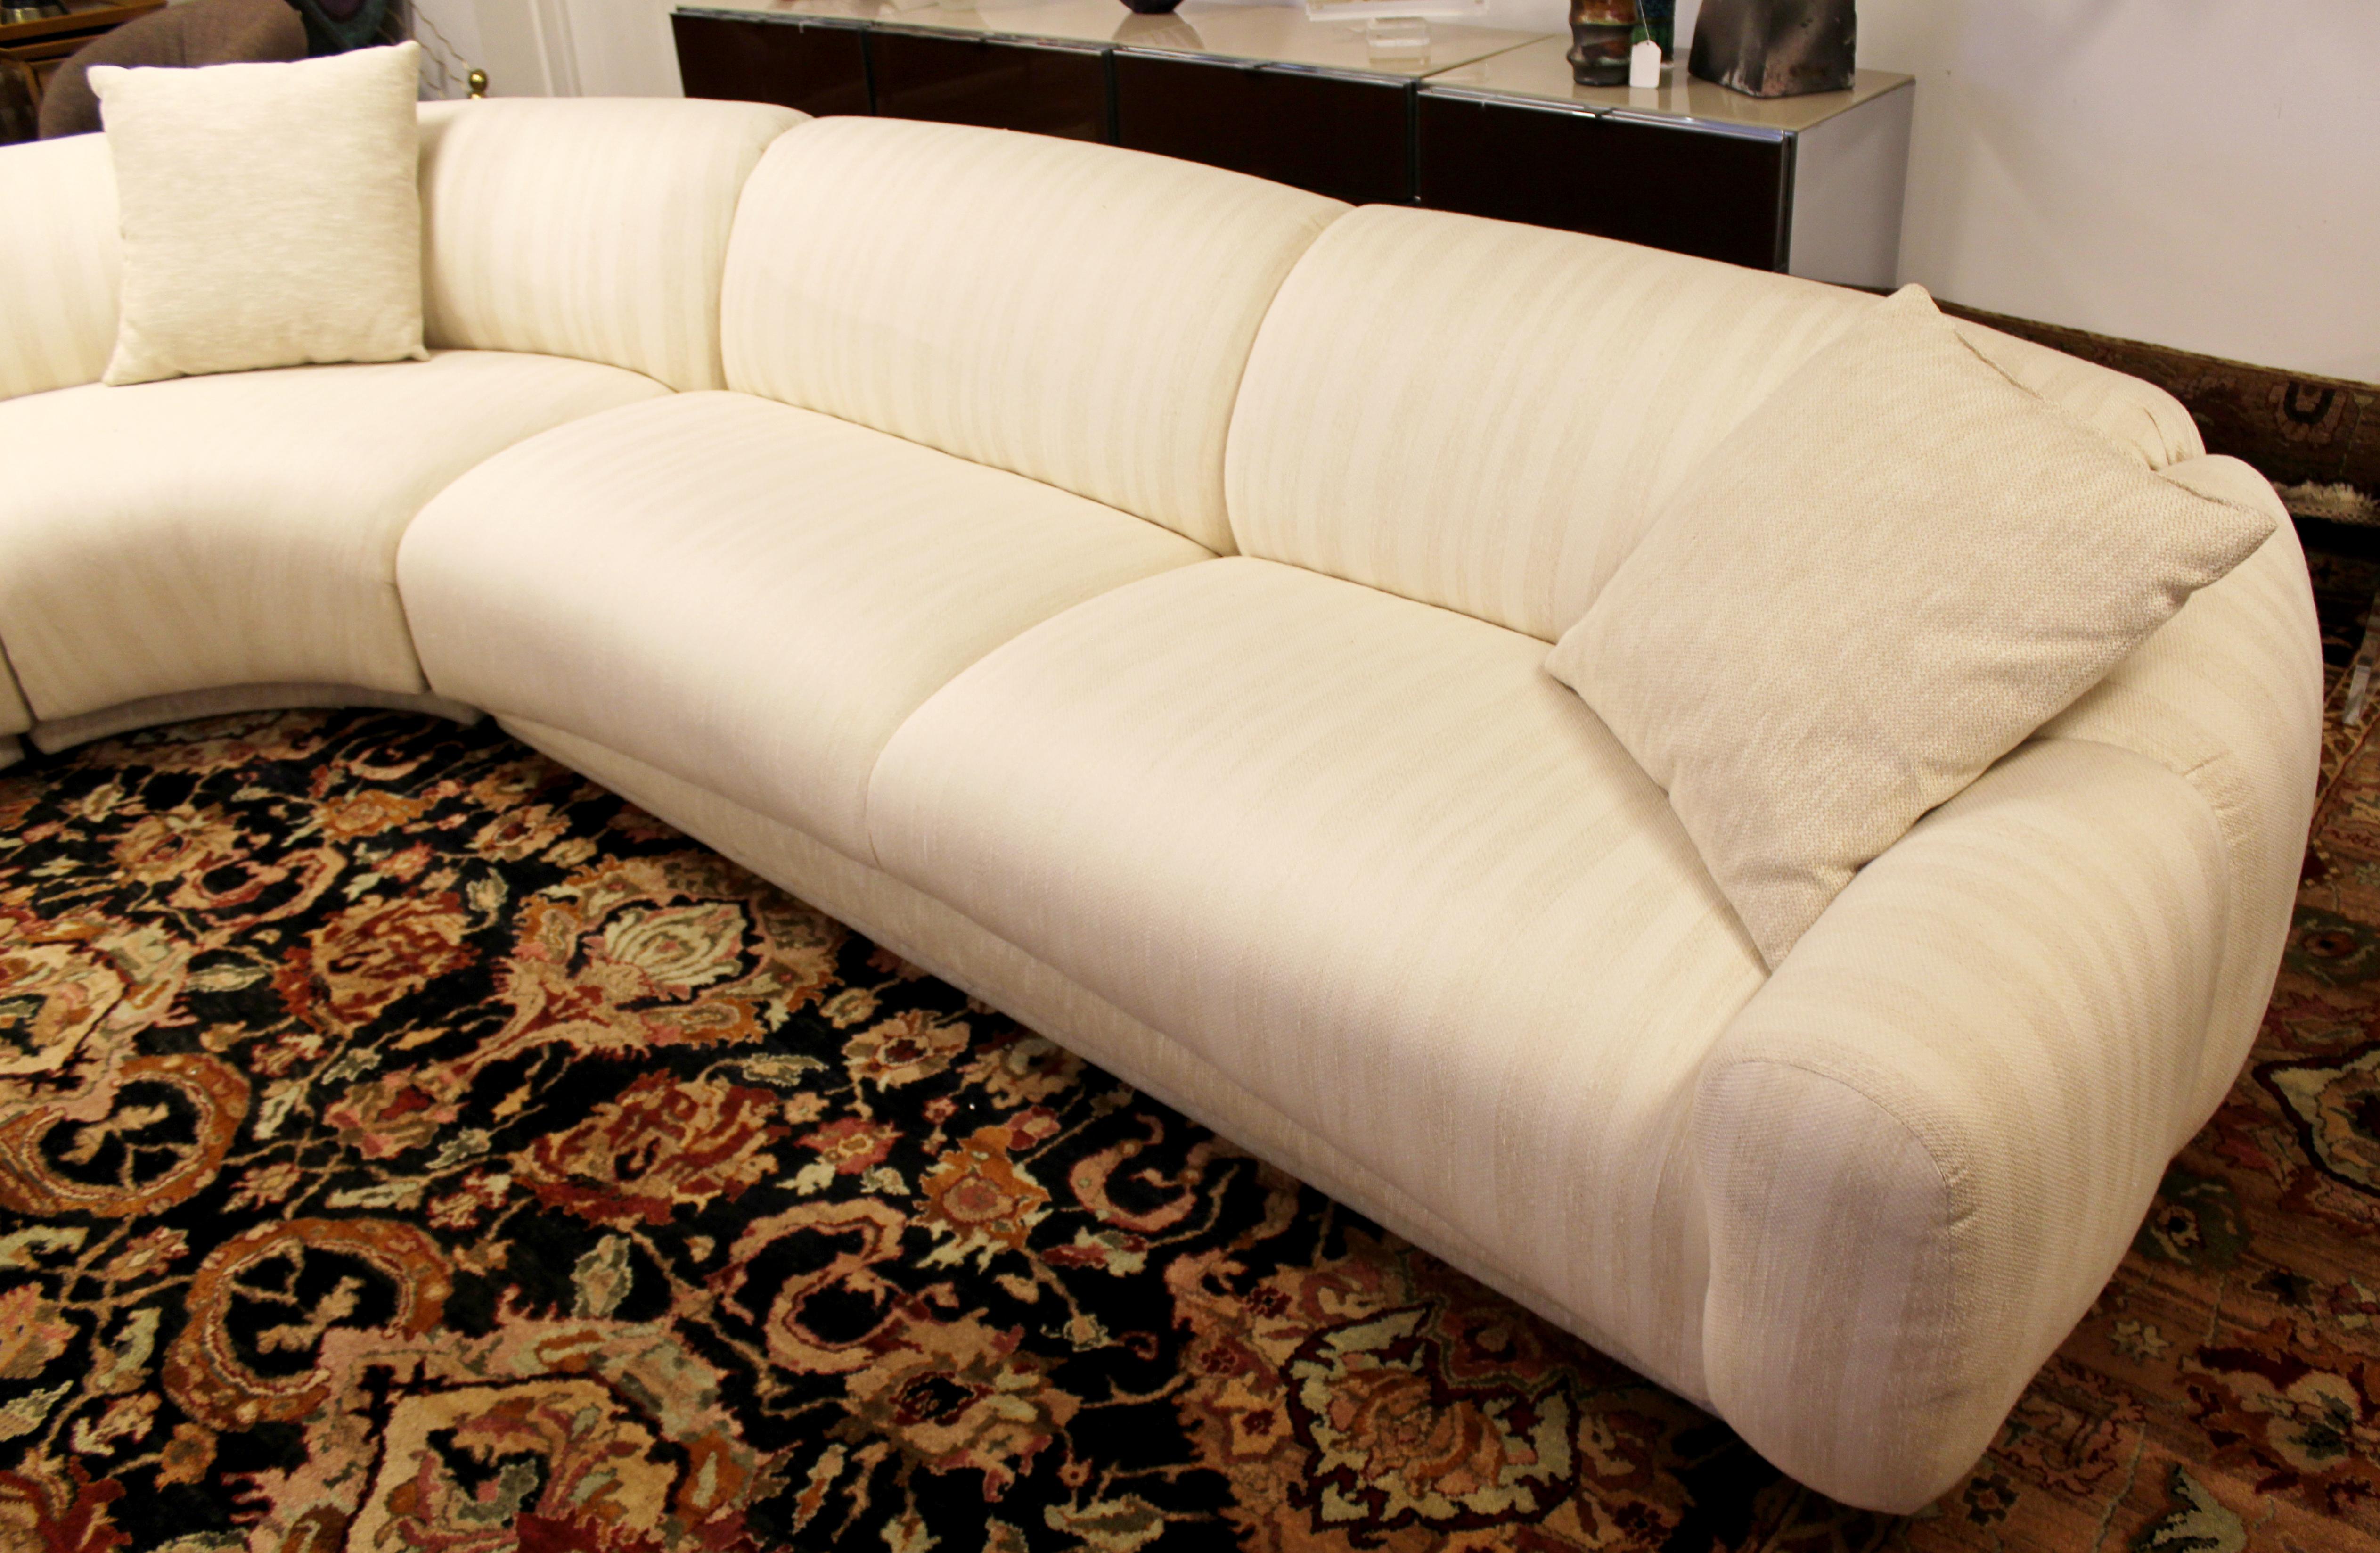 Late 20th Century Contemporary Modern Sculptural Serpentine Sofa Sectional Kagan Style 1980s